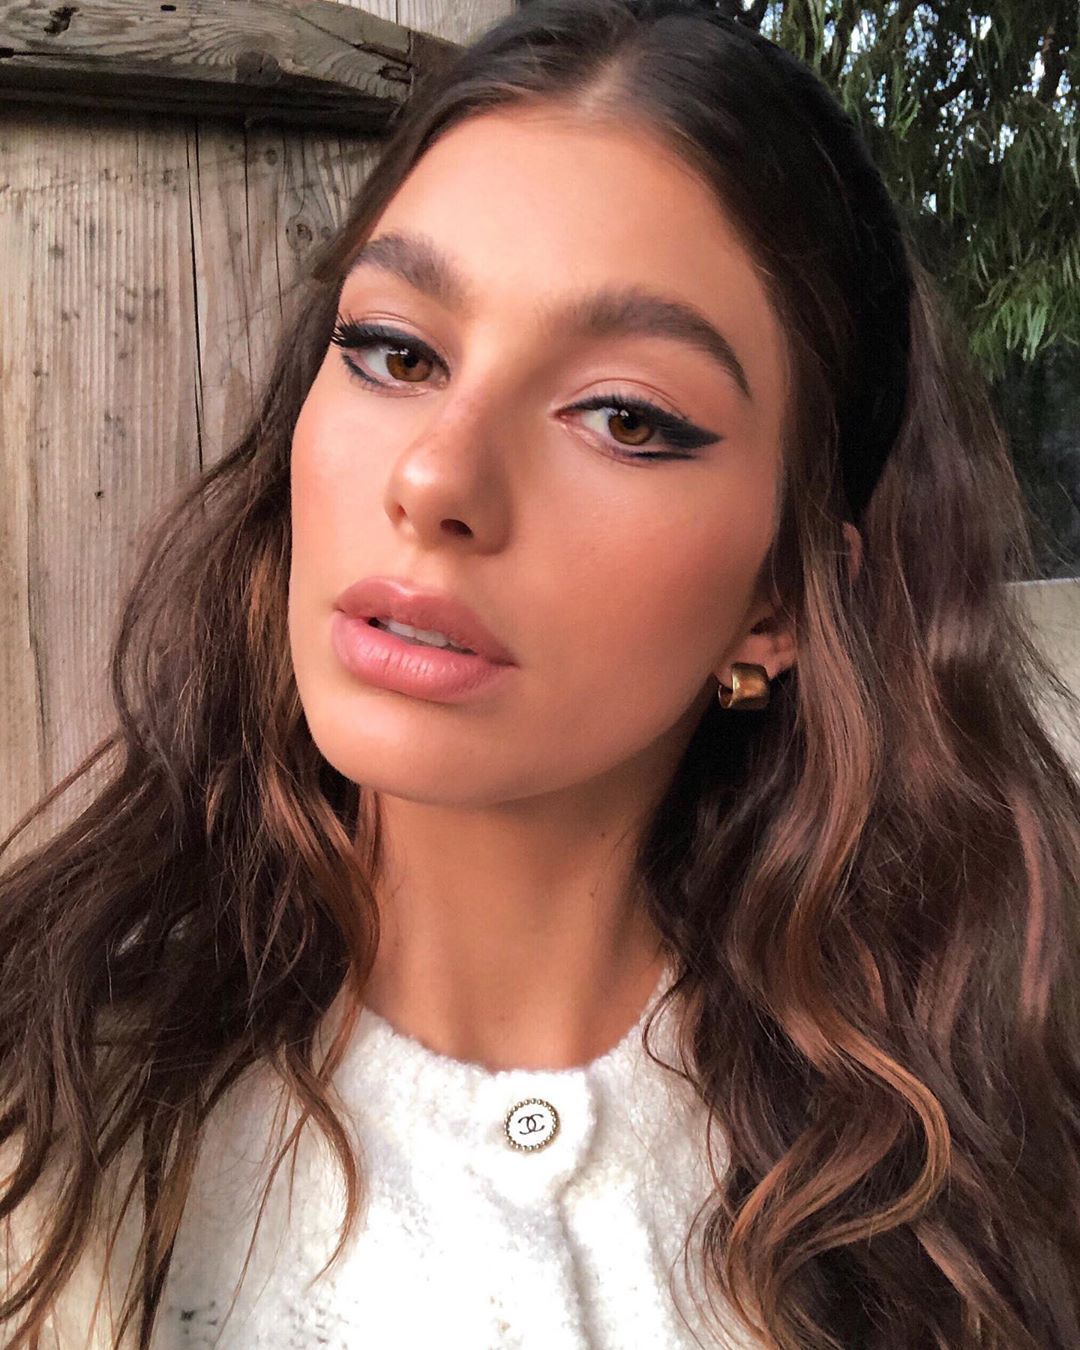 23 New Year's Eve Makeup Looks That Are Far From Basic - 23 New Year's Eve Makeup Looks That Are Far From Basic -   16 style French makeup ideas